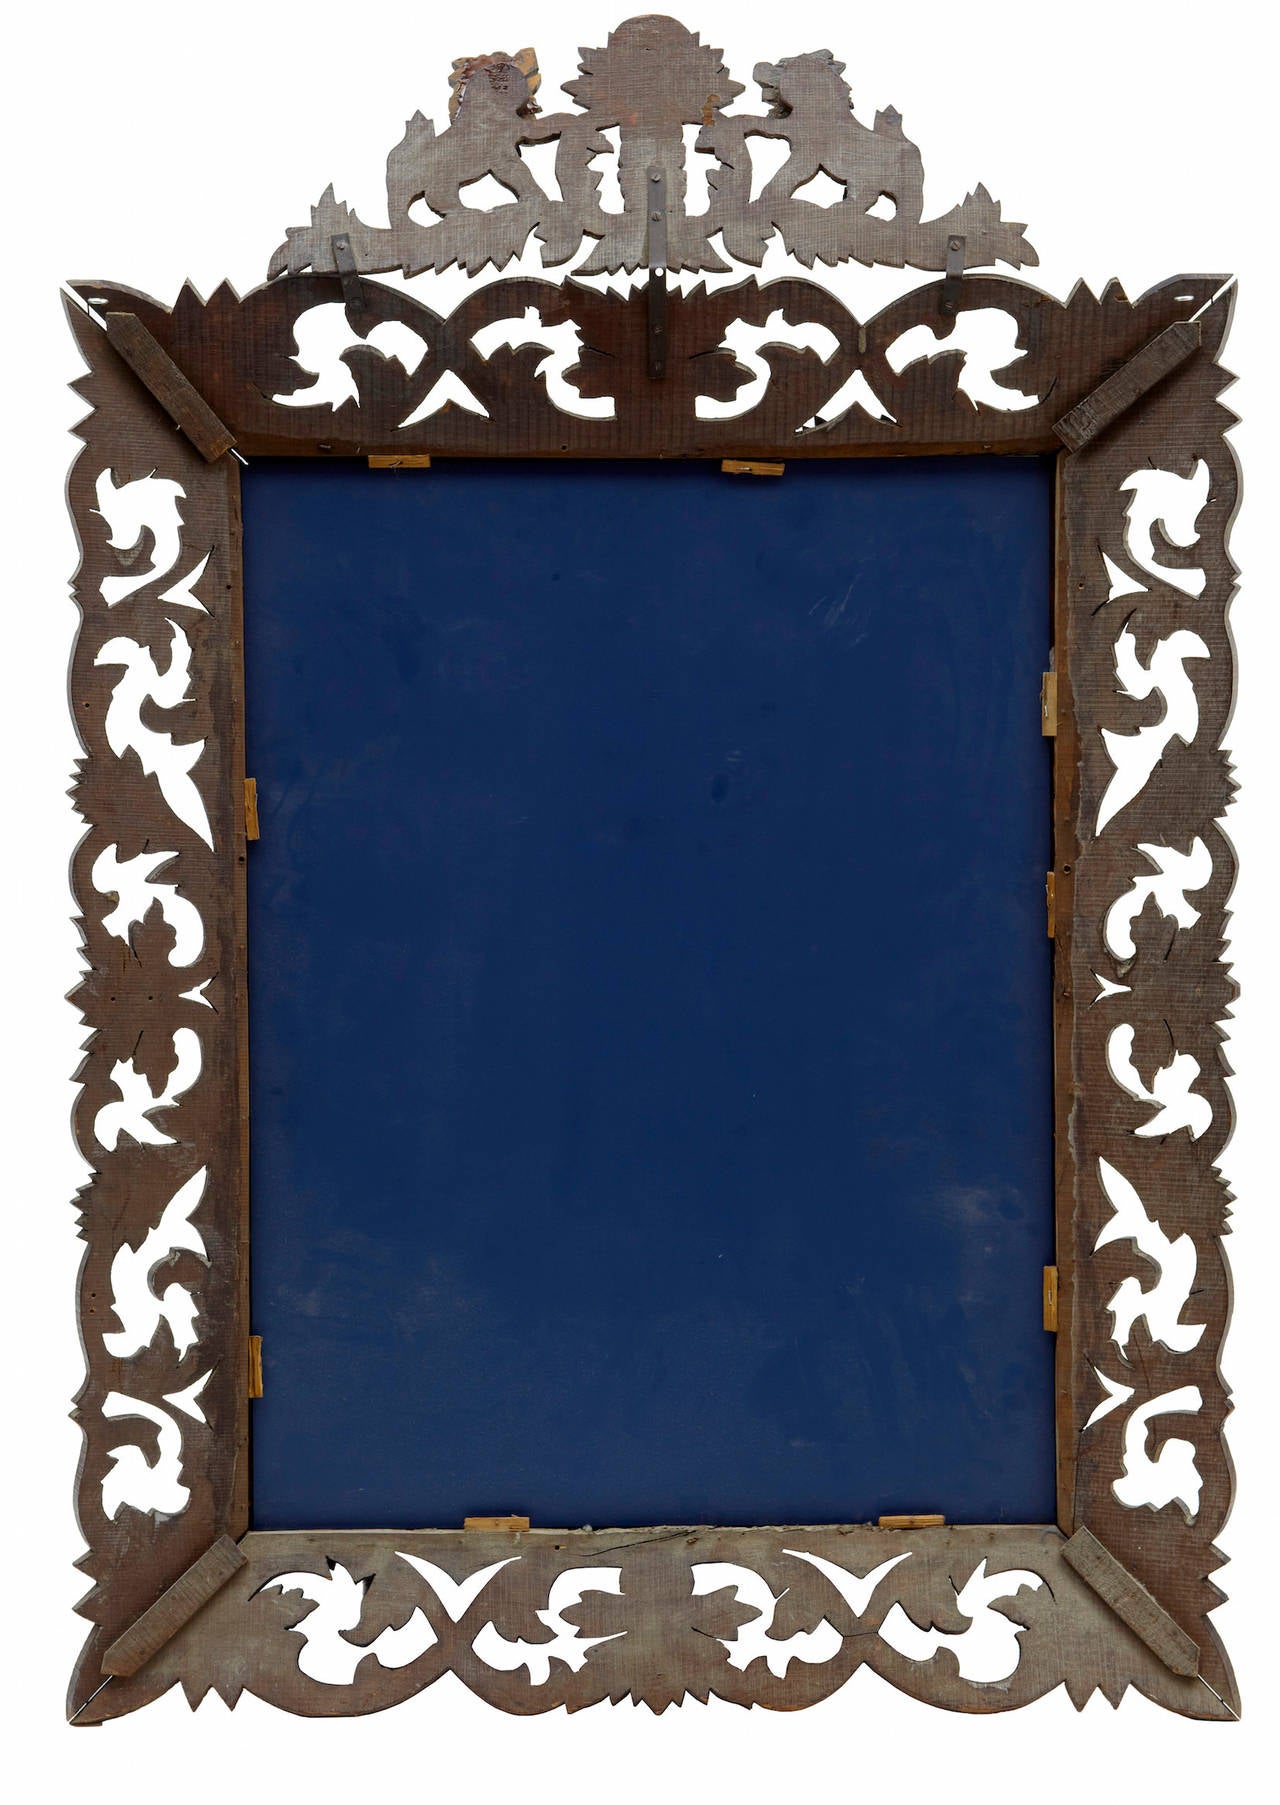 19th century French carved oak mirror.

Finely carved French mirror, circa 1870.

Carved with foliage, surmounted by a pair of lions.

Replaced mirror glass

Measures: Height 53